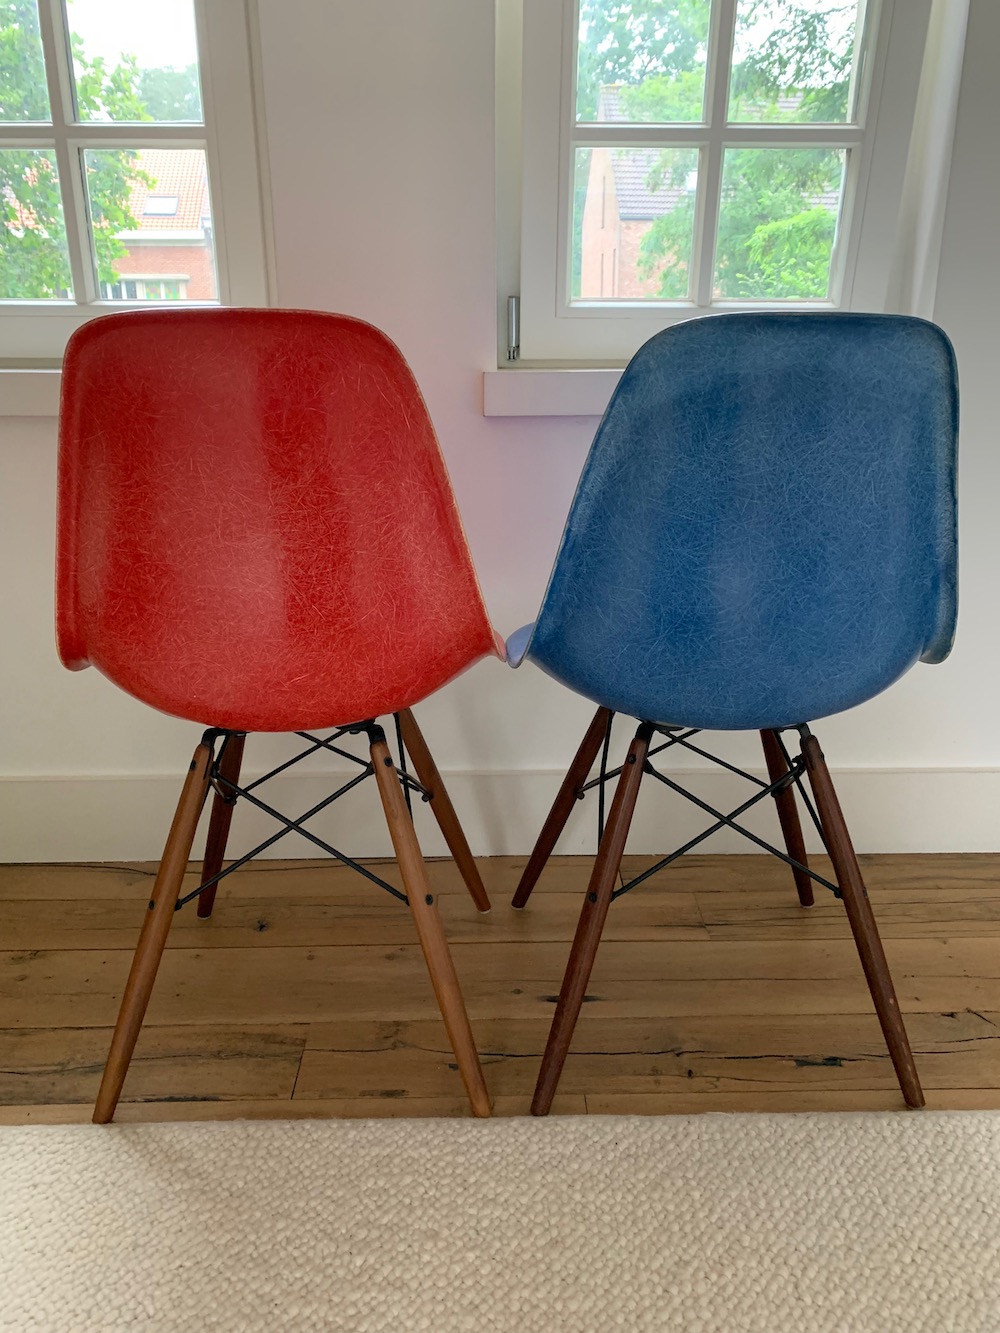 DSW, Eames chair, Eames, Charles Eames,stackable chairs, chairs vintage,  Charles and Ray Eames, Herman Miller, fiberglass chair, fiberglass, shell chair, vintage chair, US design chair, design chair, icon design, vintage design chair, red chair, blue chair, red and blue chairs, dowel base, kitchen chairs, dining chairs